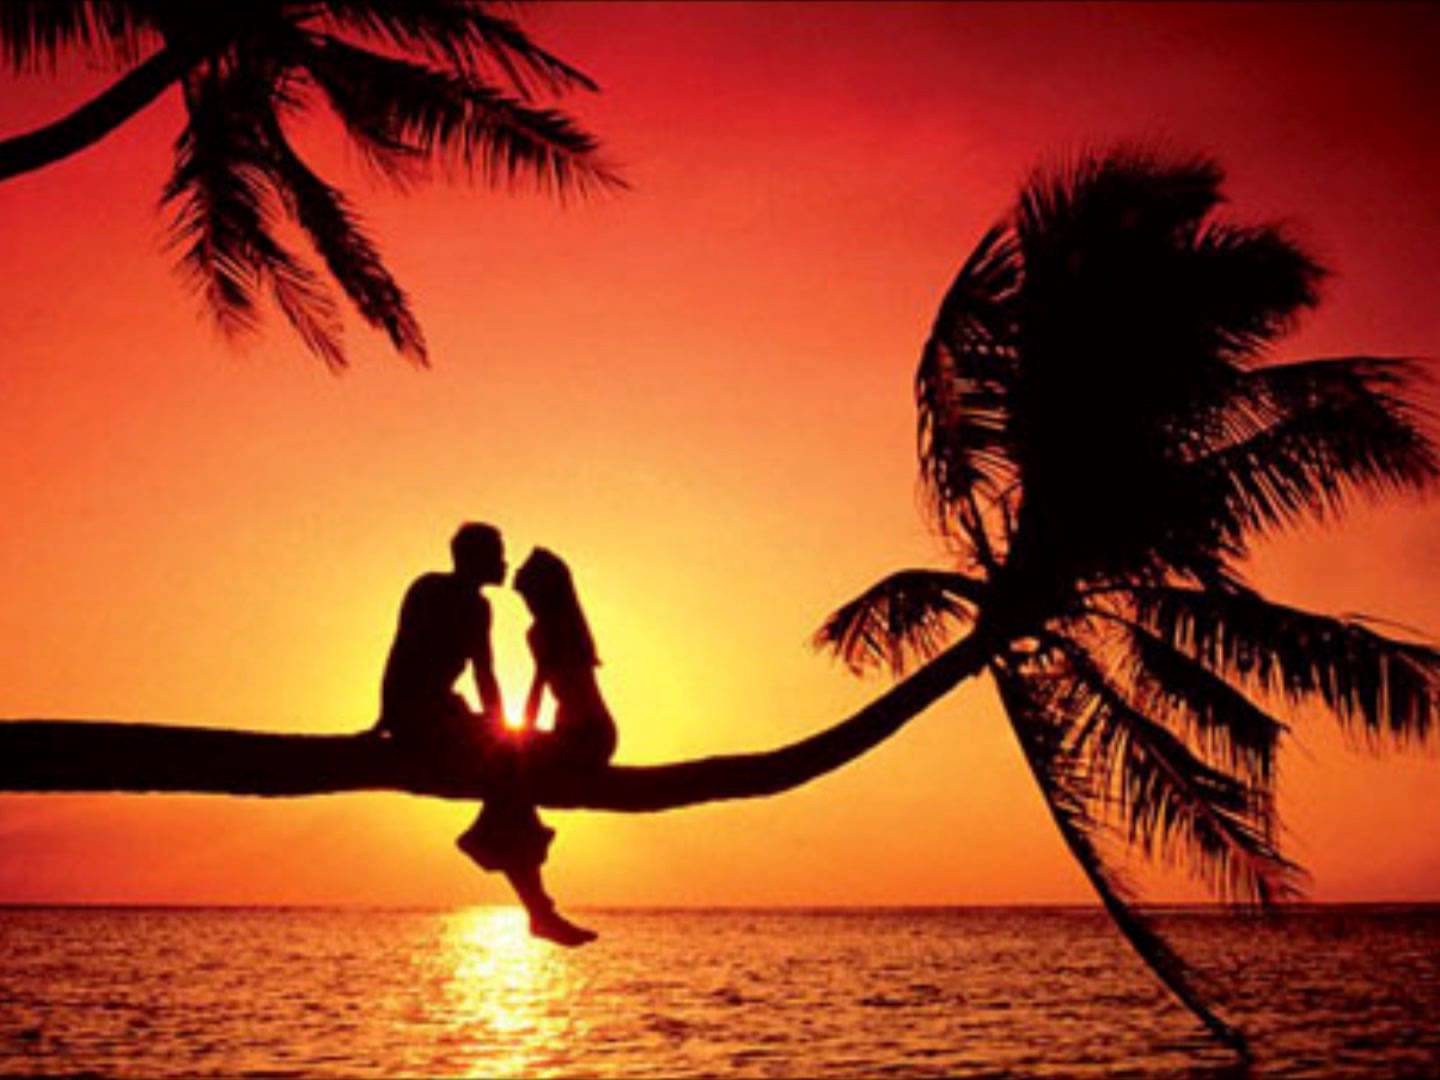 Sweet Lovers Image Wallpaper Download cool HD wallpapers here